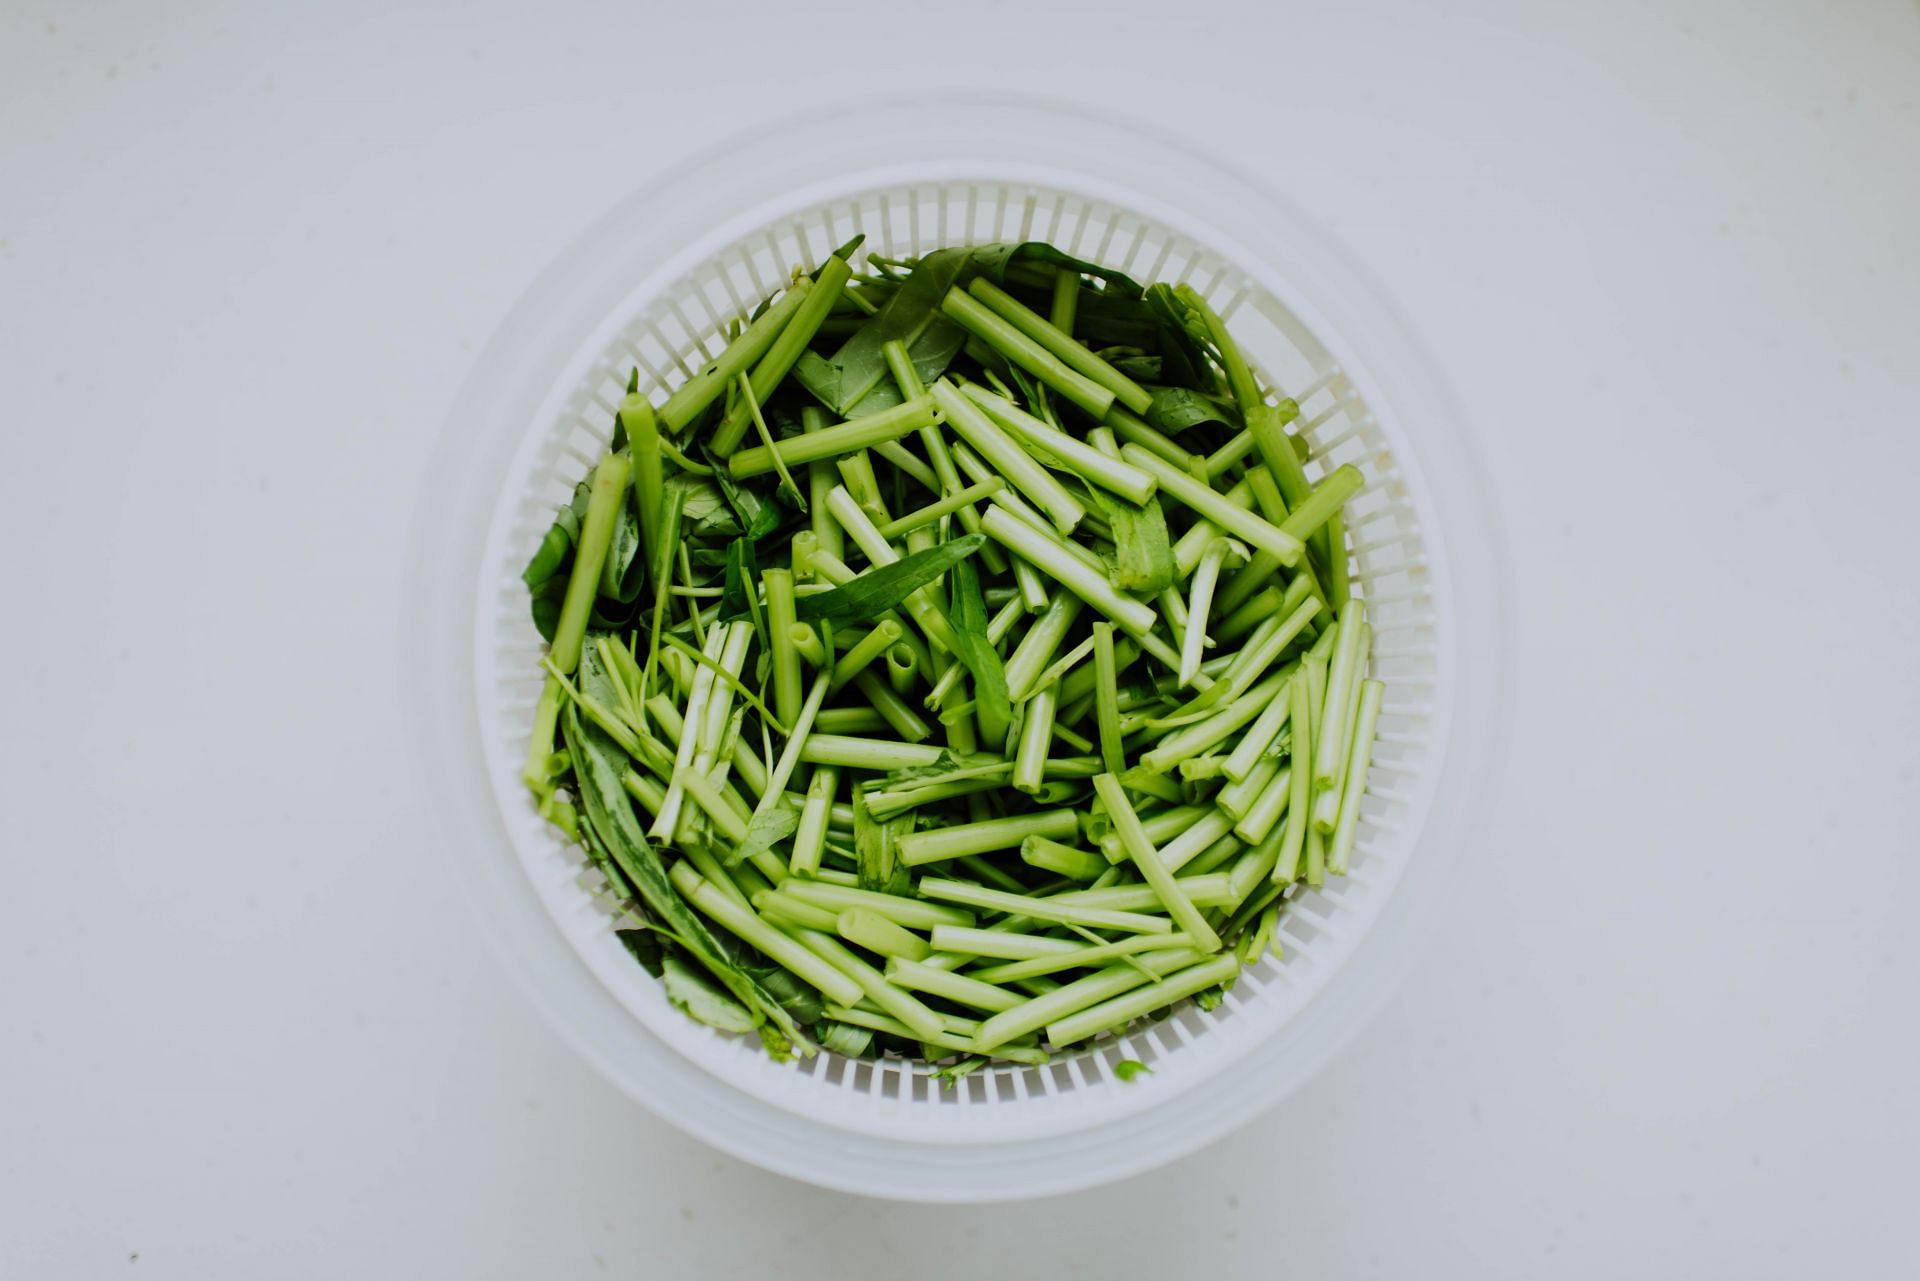 Scallions vs green onions: Both are a powerhouse of nutrition and should be included in your diet. (Image via Unsplash/Chuttersnap)